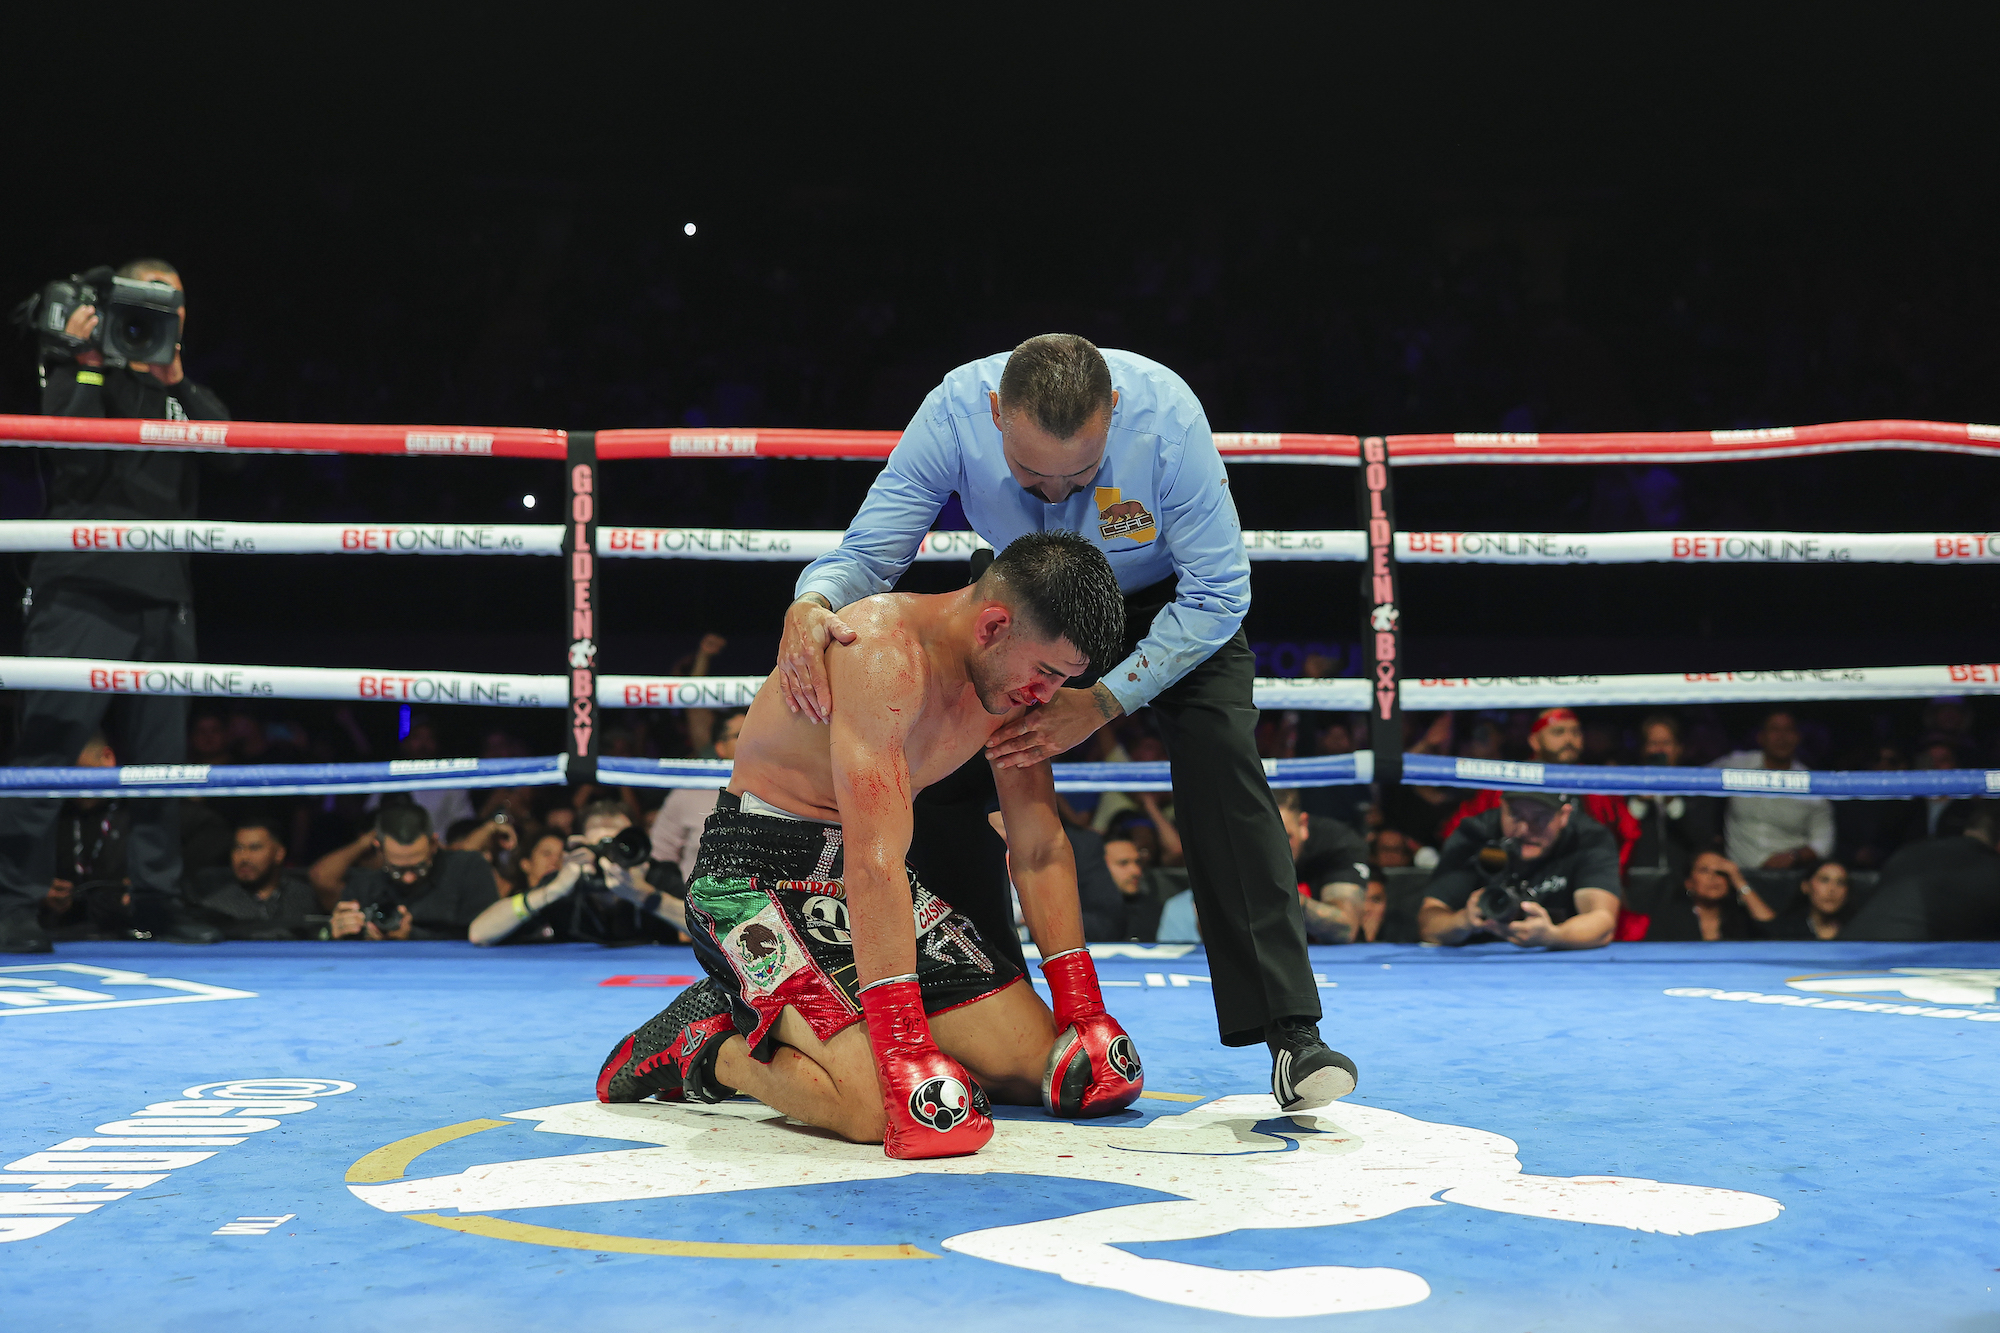 Alexis Rocha, bruised and beaten, blinked a tear from a swollen eye after his devastating loss to Giovani Santillan